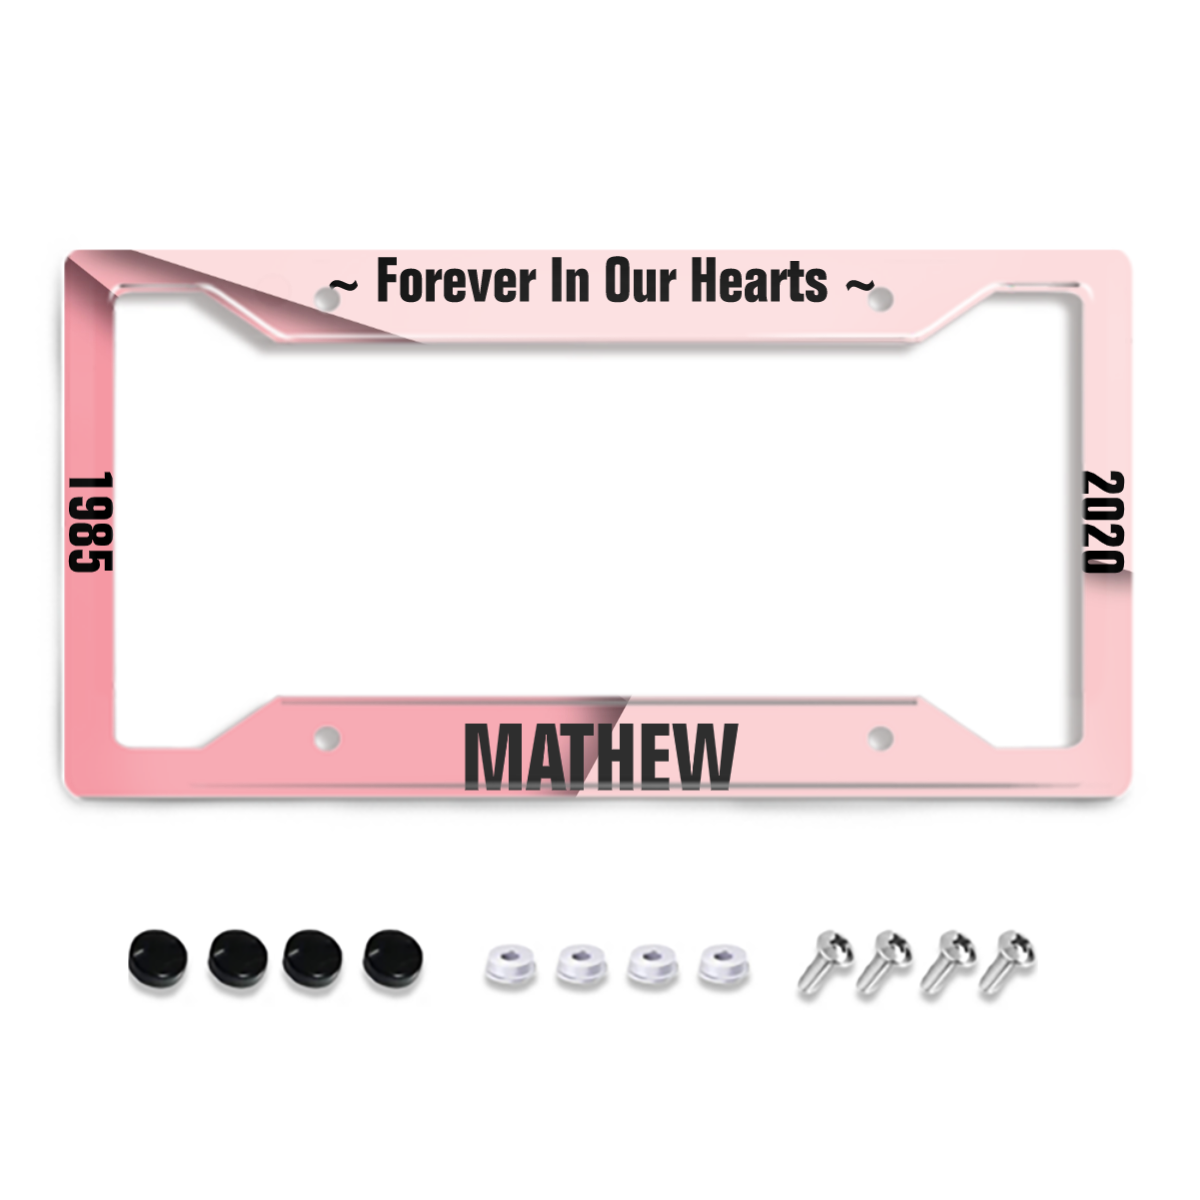 Memorial License Plate with Clouds / Hearts License Plate Frame